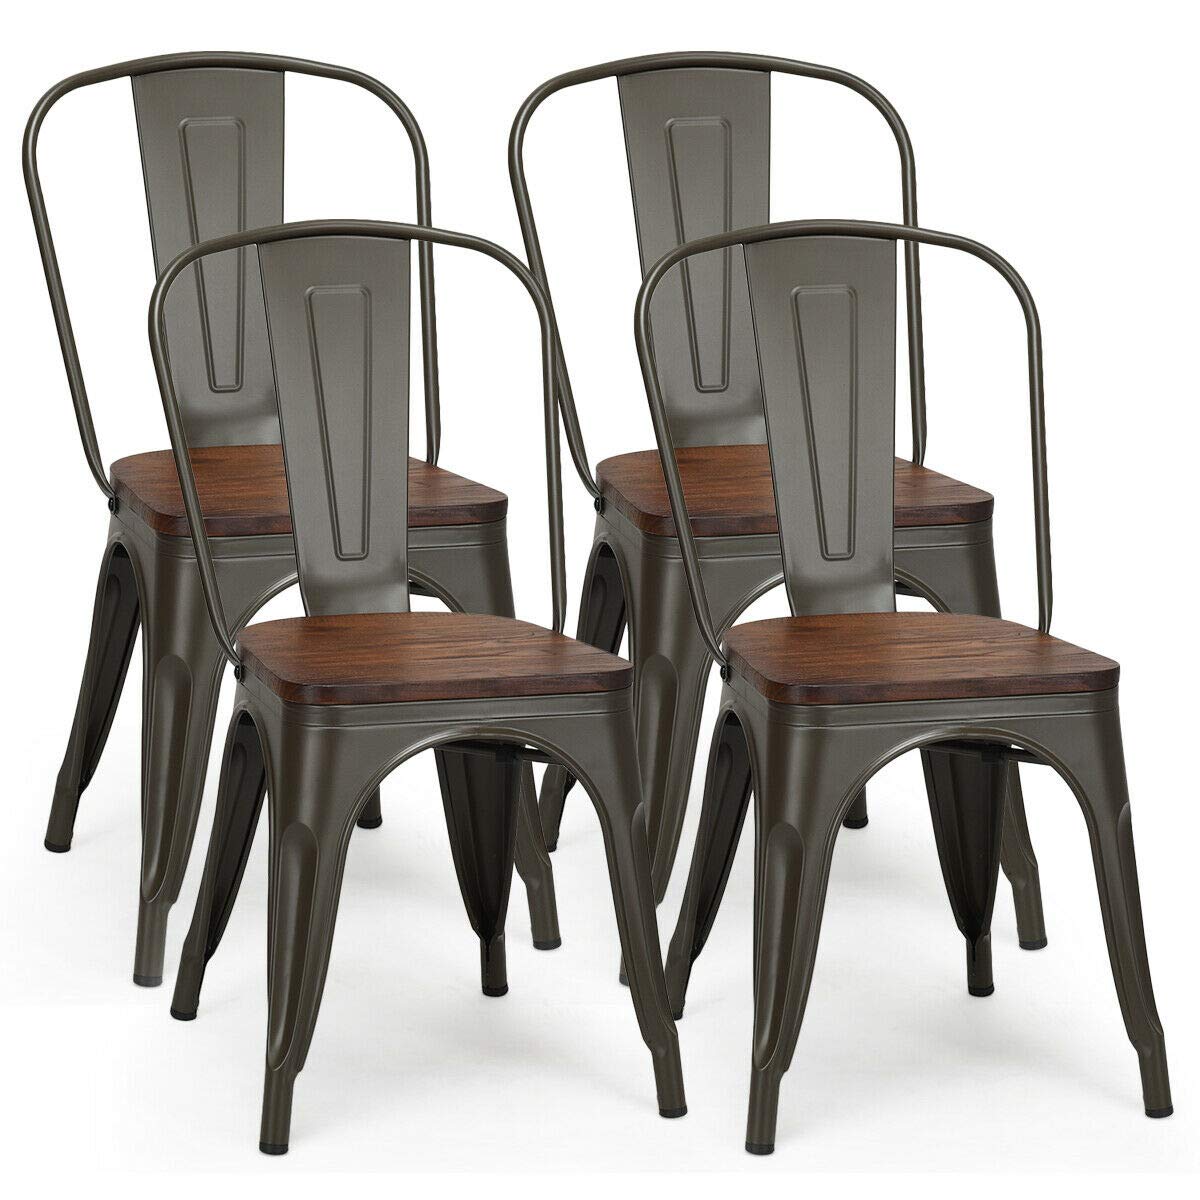 18 Inch Dining Chair Set of 4, Industrial Vintage Stackable Metal Chairs